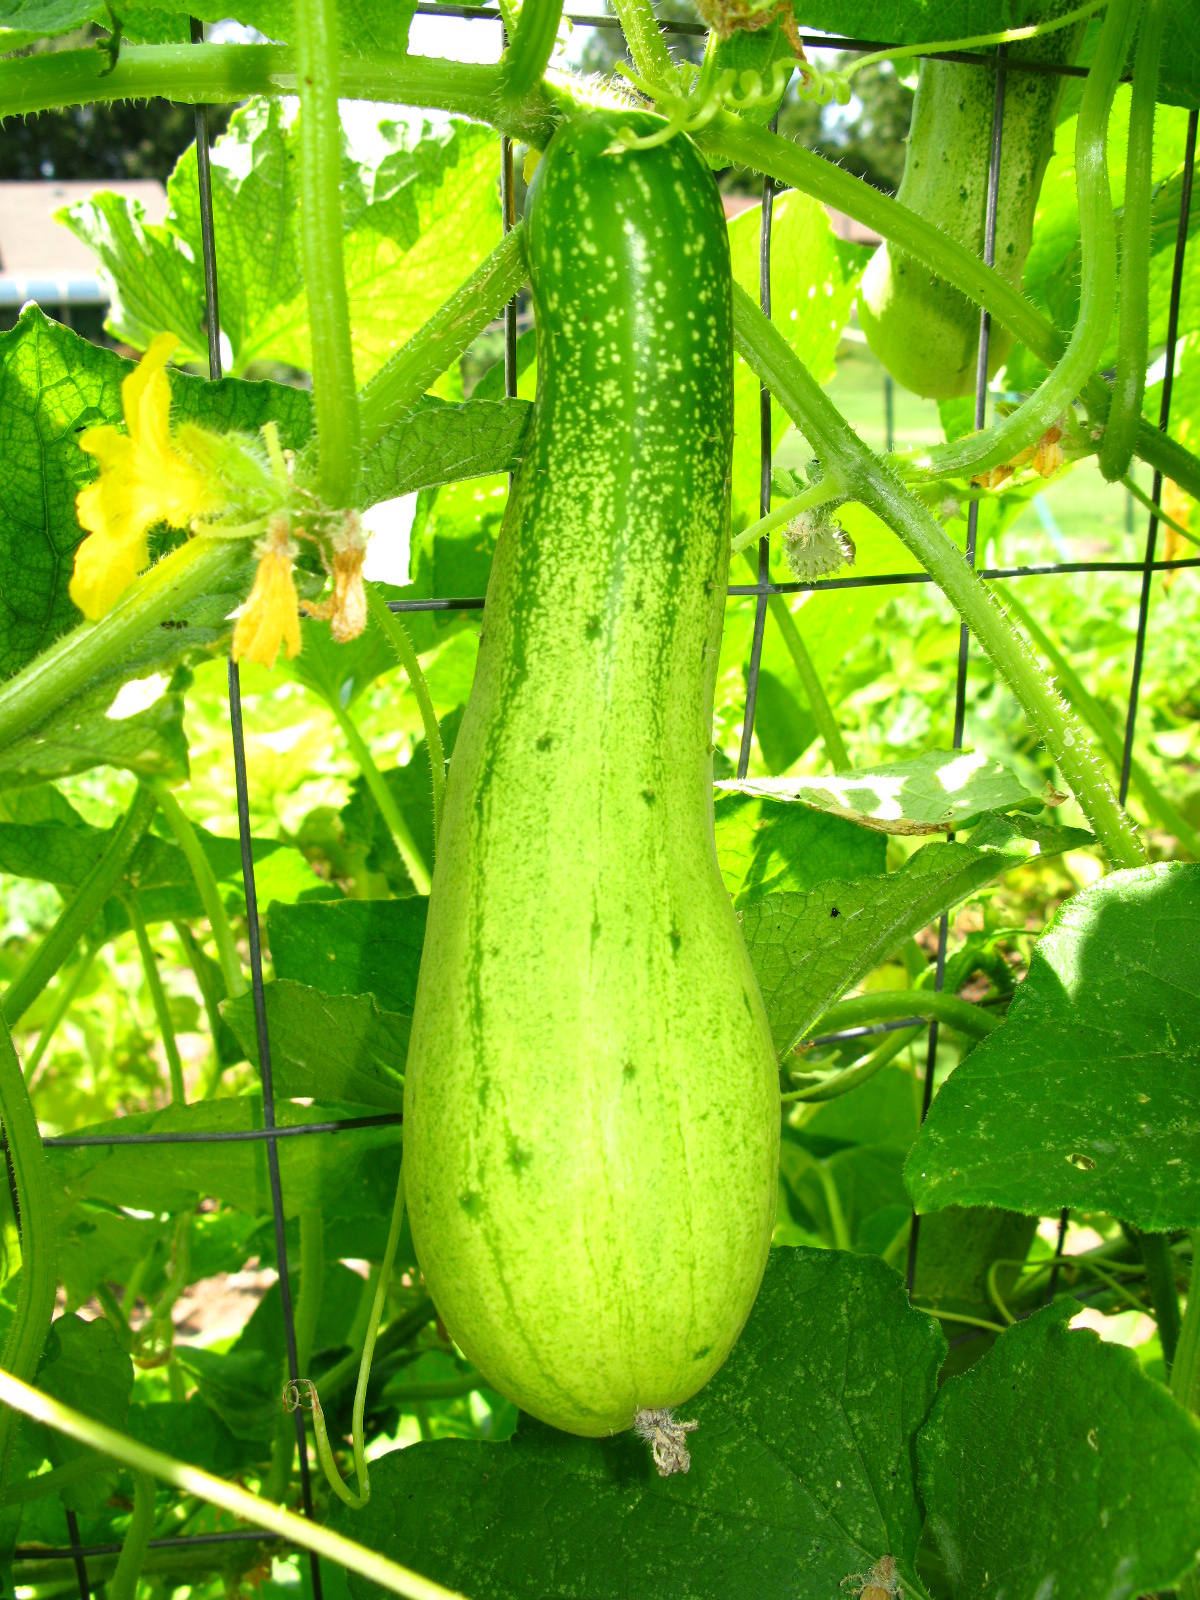 large cucumbers growing on a green plant in a sunlit garden